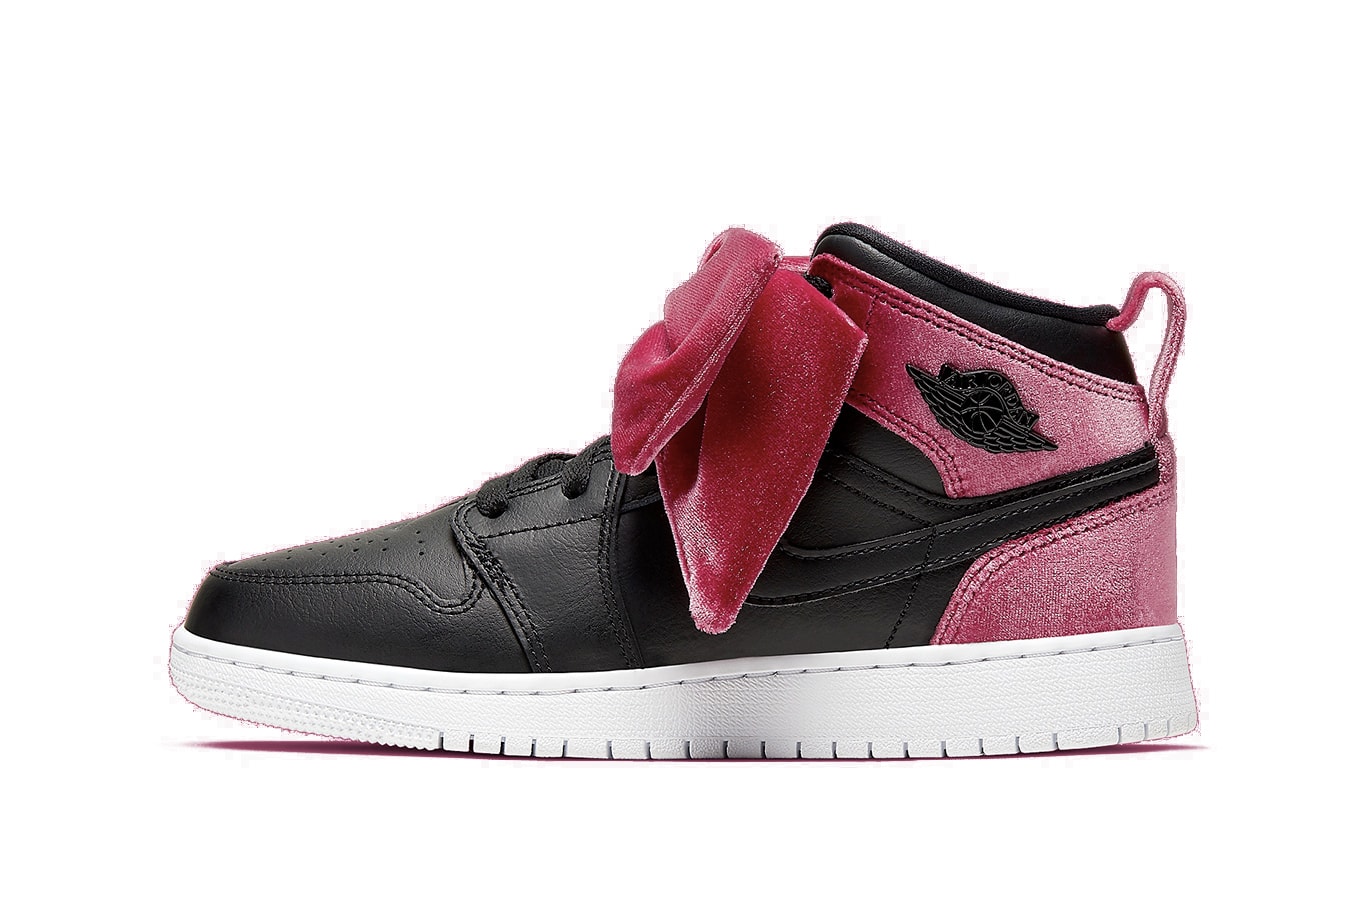 Nike Air Jordan 1 Mid Pink White Bow Release Sneaker Shoe Women's Exclusive Collection 